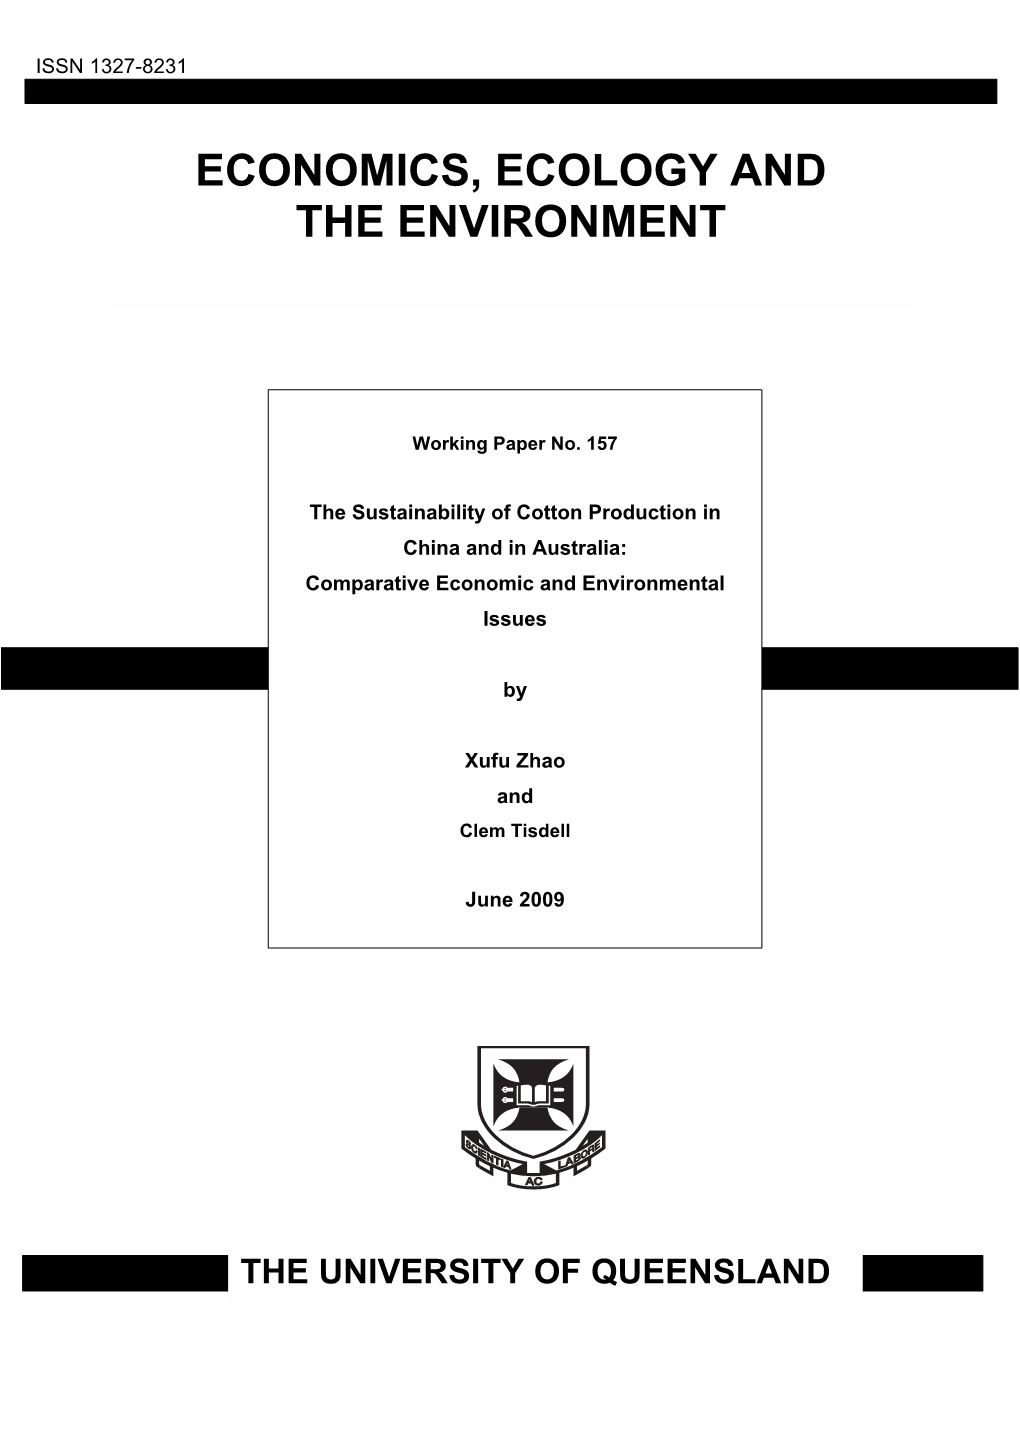 The Sustainability of Cotton Production in China and Australia: Comparative Economic and Environmental Issues1